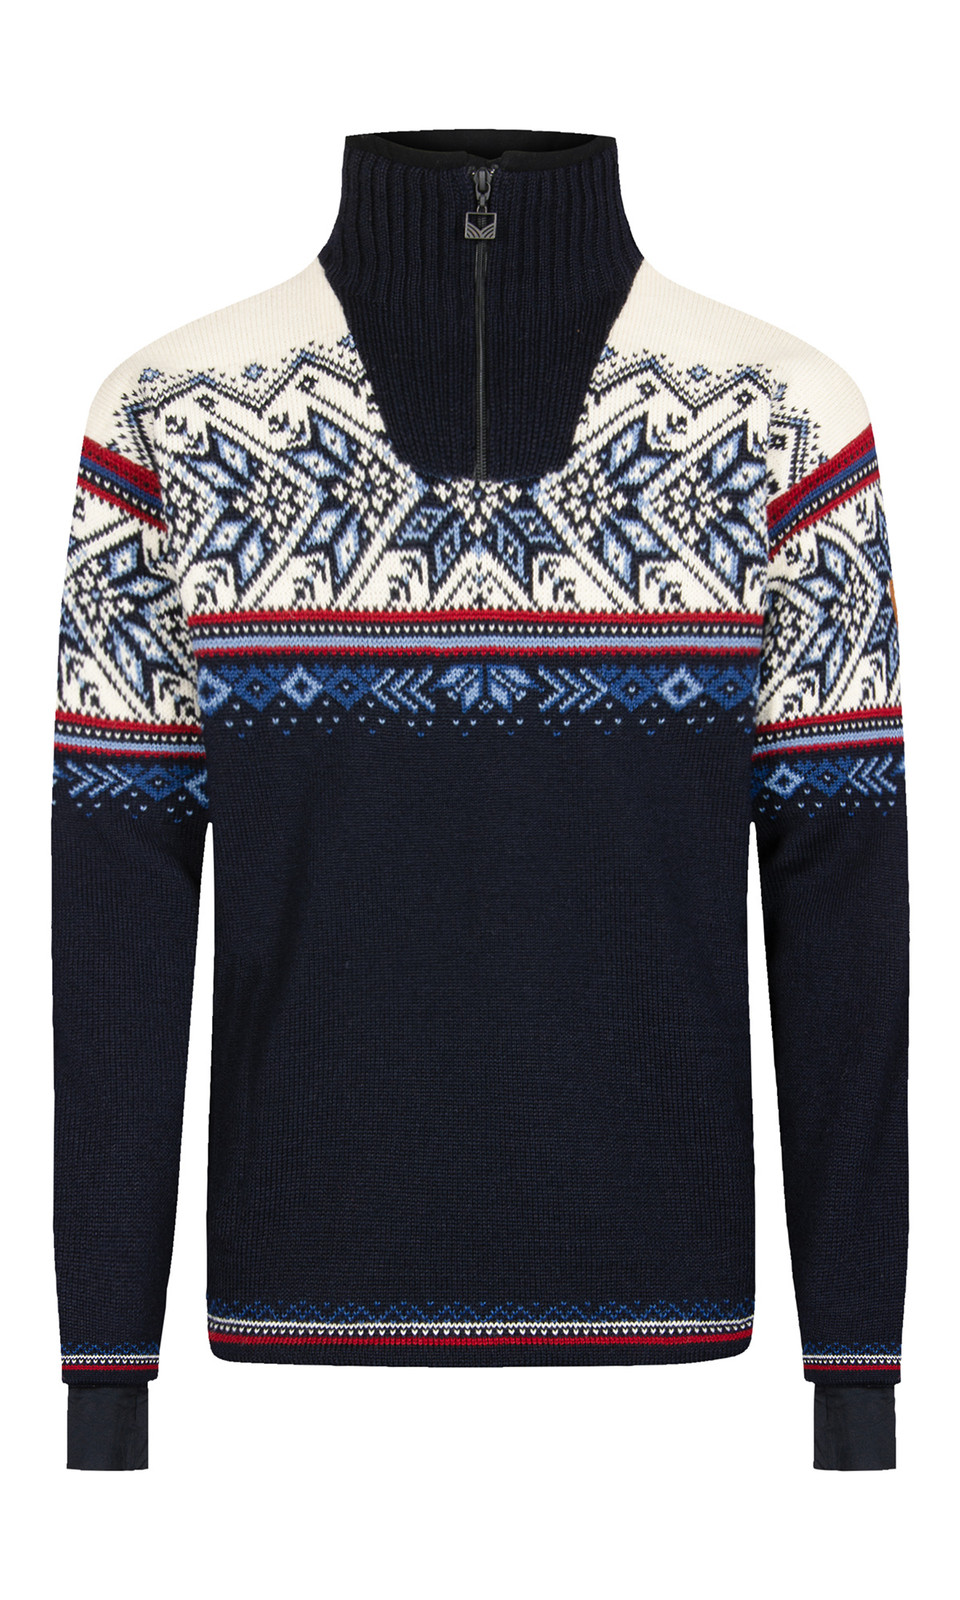 Dale of Norway Vail Men's Windstopper Sweater - Midnight Navy/Off White/Red Rose, 93981-C_product